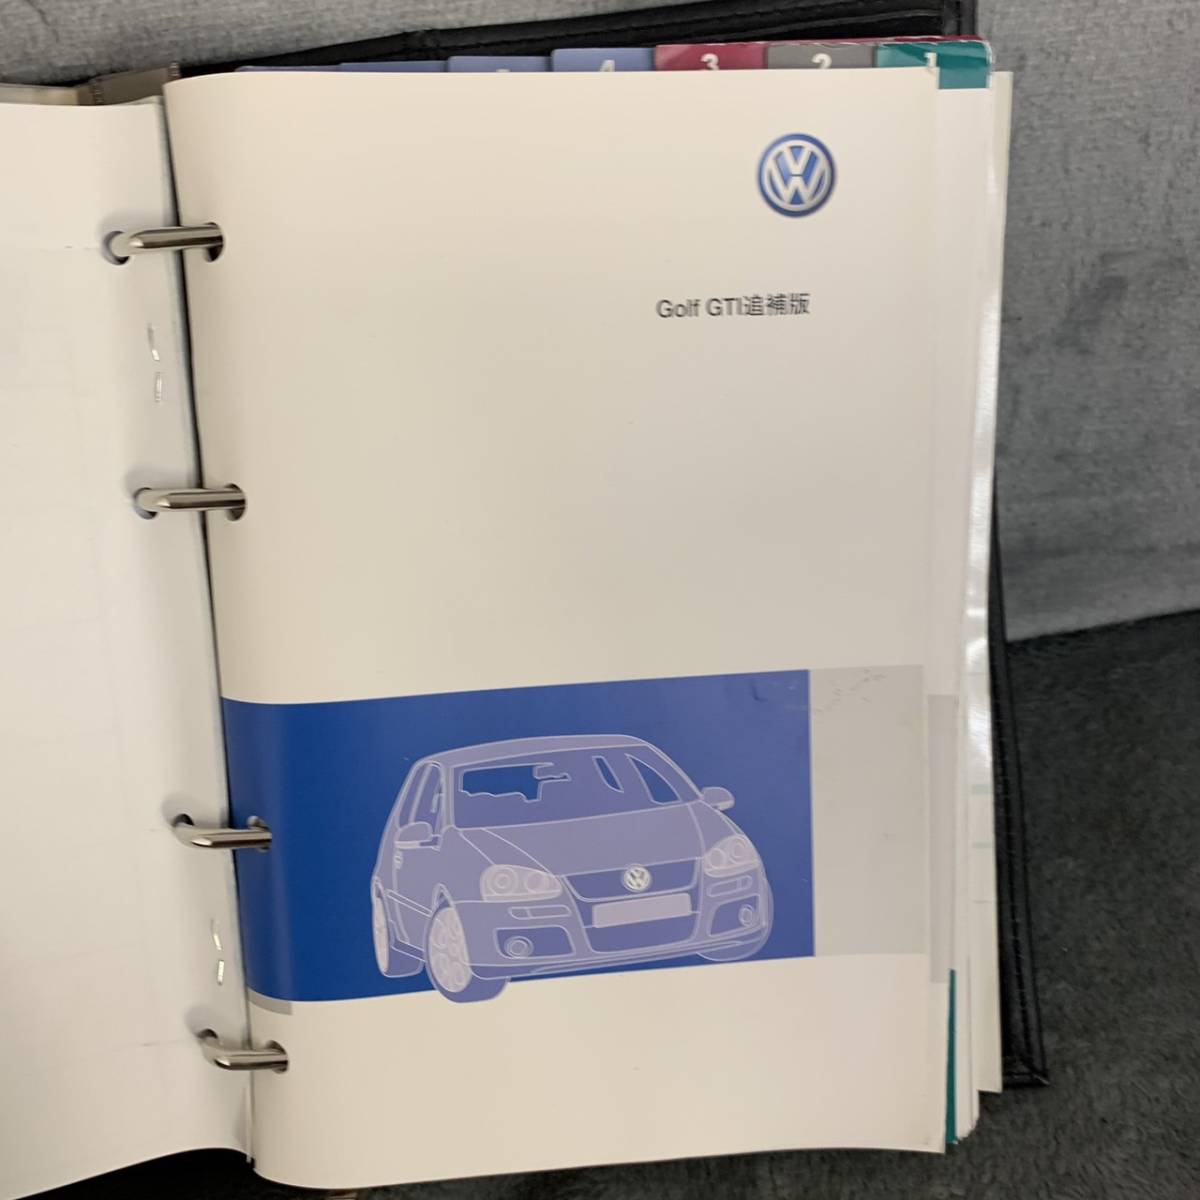  Volkswagen VW Golf GTI vehicle inspection certificate inserting 2008 year registration car owner manual manual 